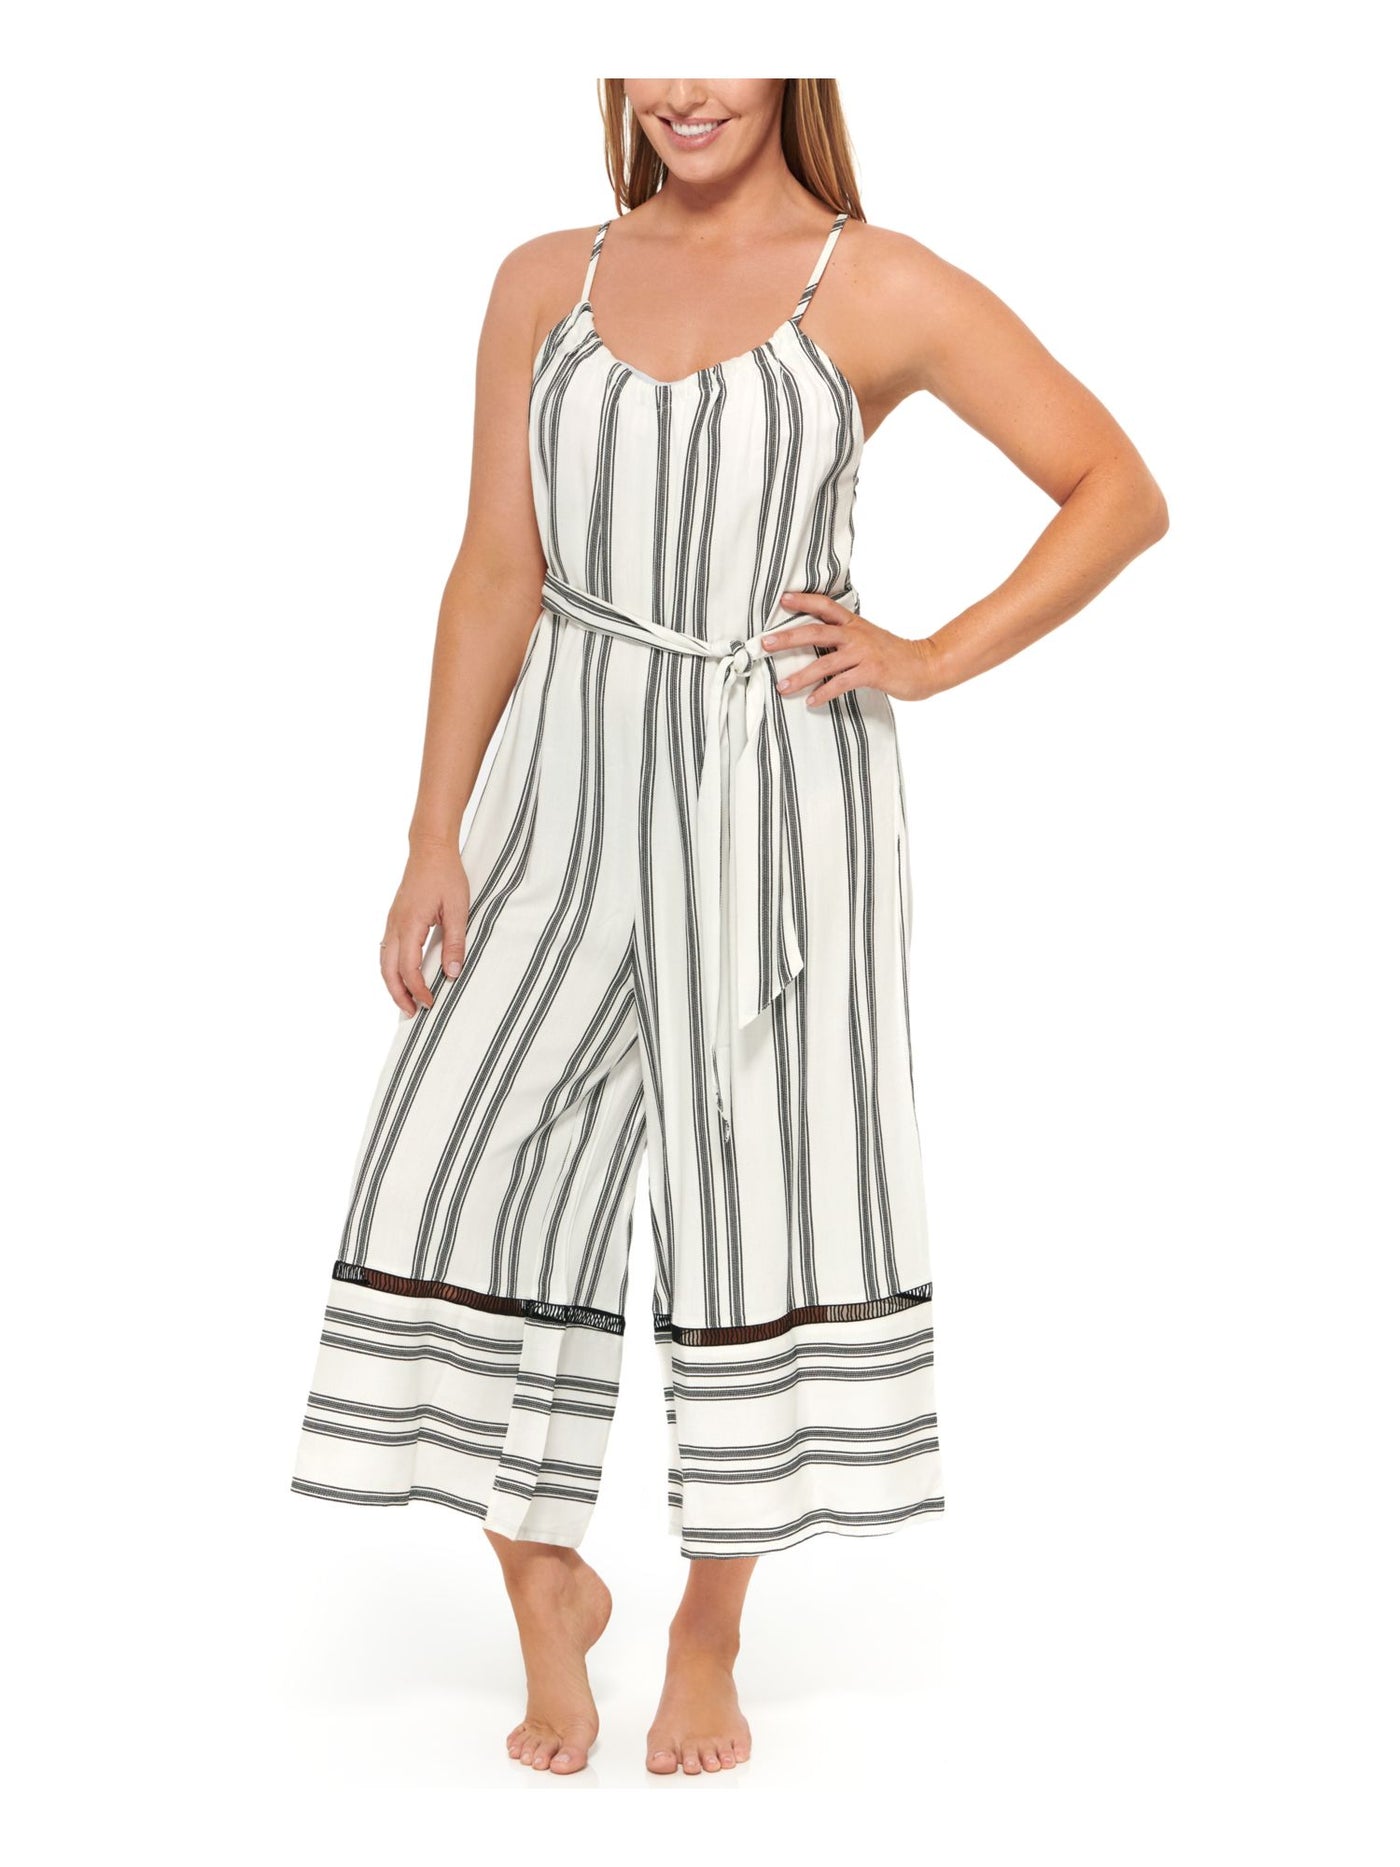 DOTTI Women's White Striped Wide Leg Jumpsuit Belted Adjustable Newport Scoop Neck Swimsuit Cover Up M